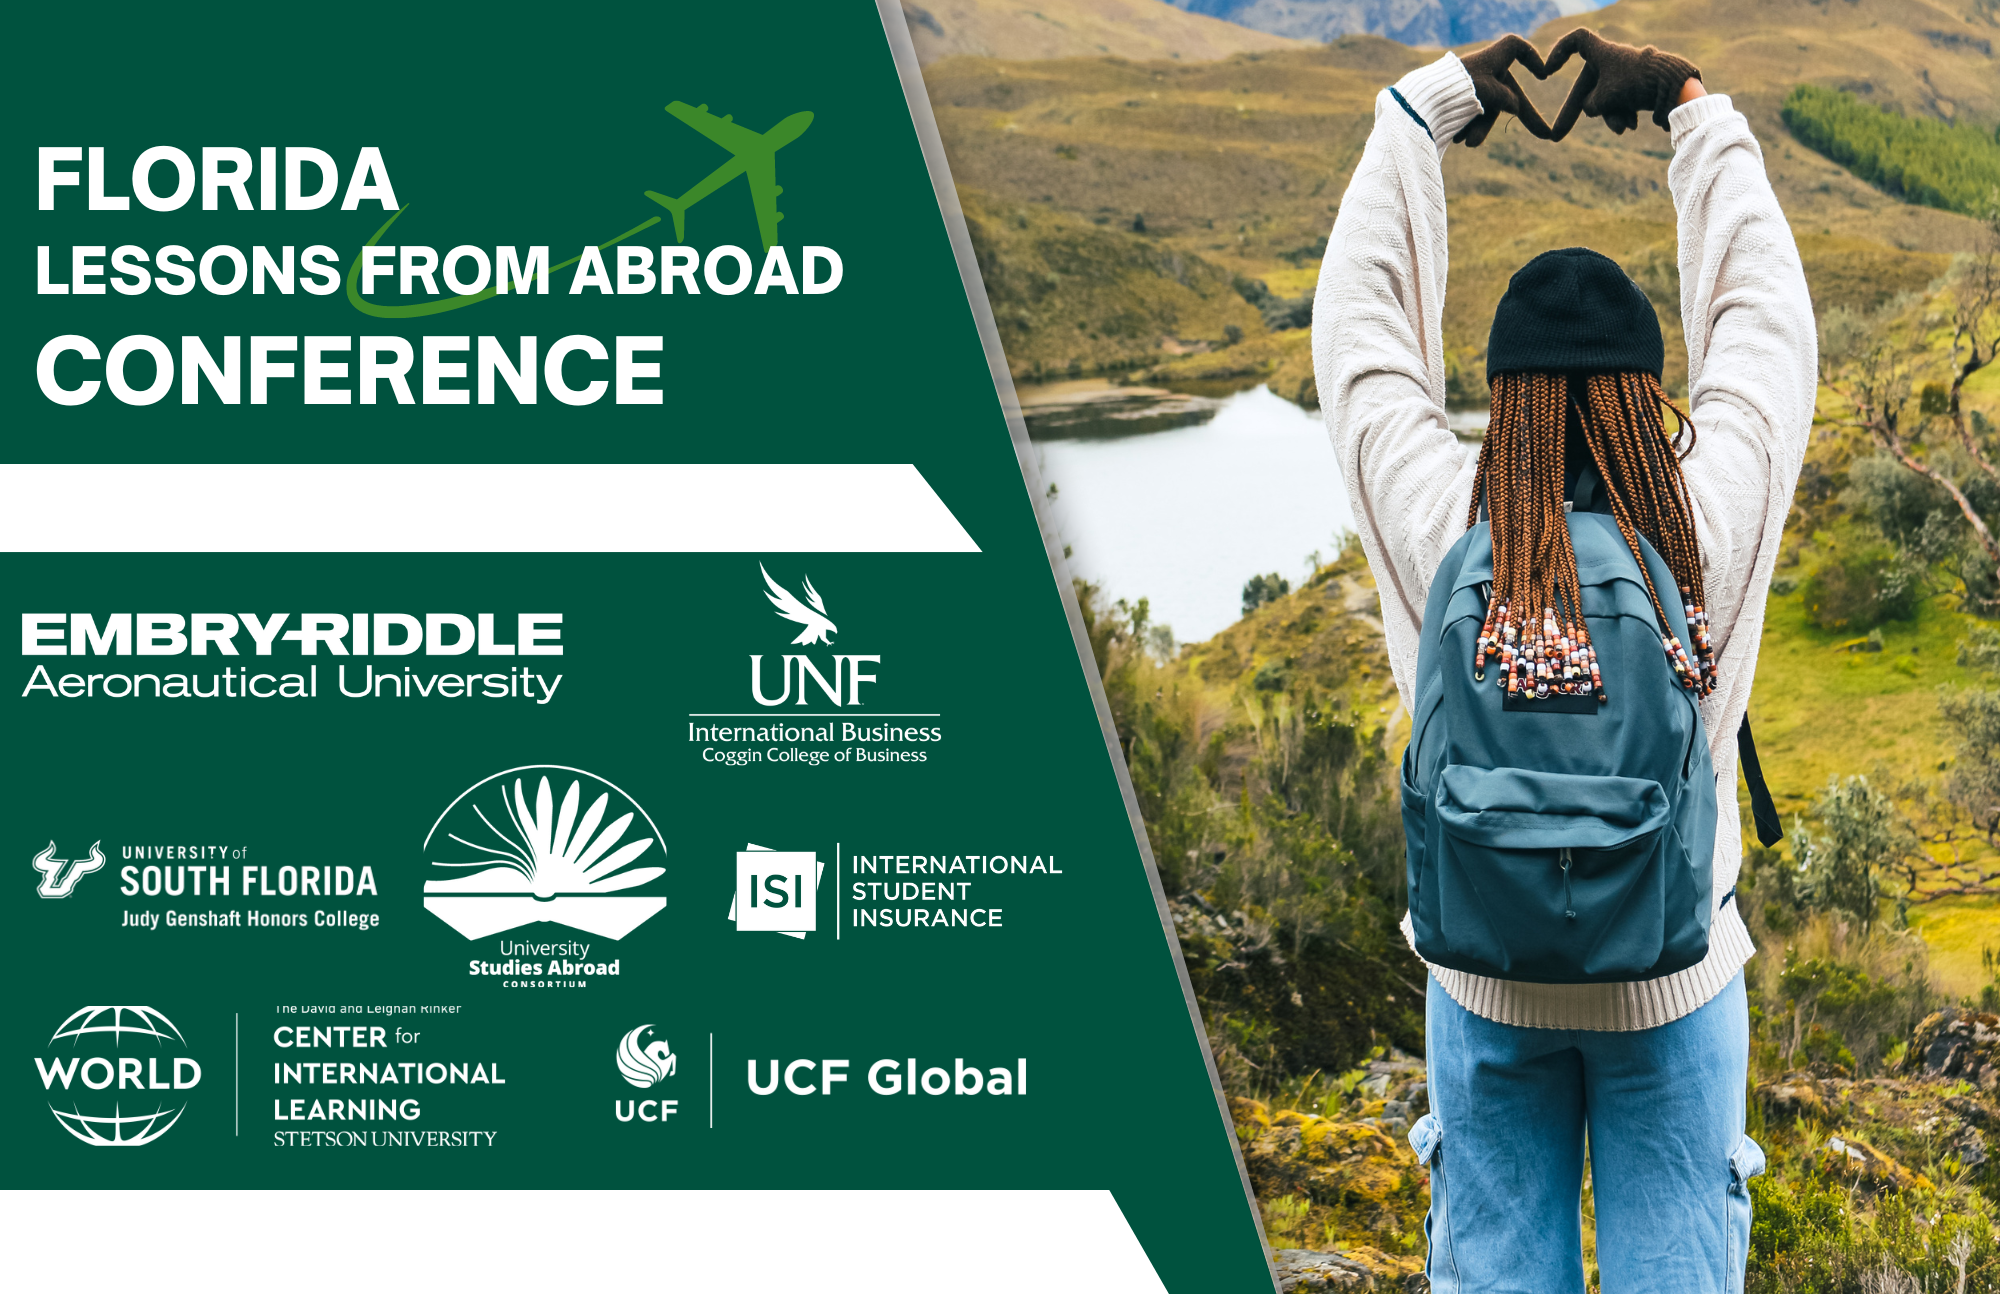 Florida lessons from abroad conference poster with university sponsor logos